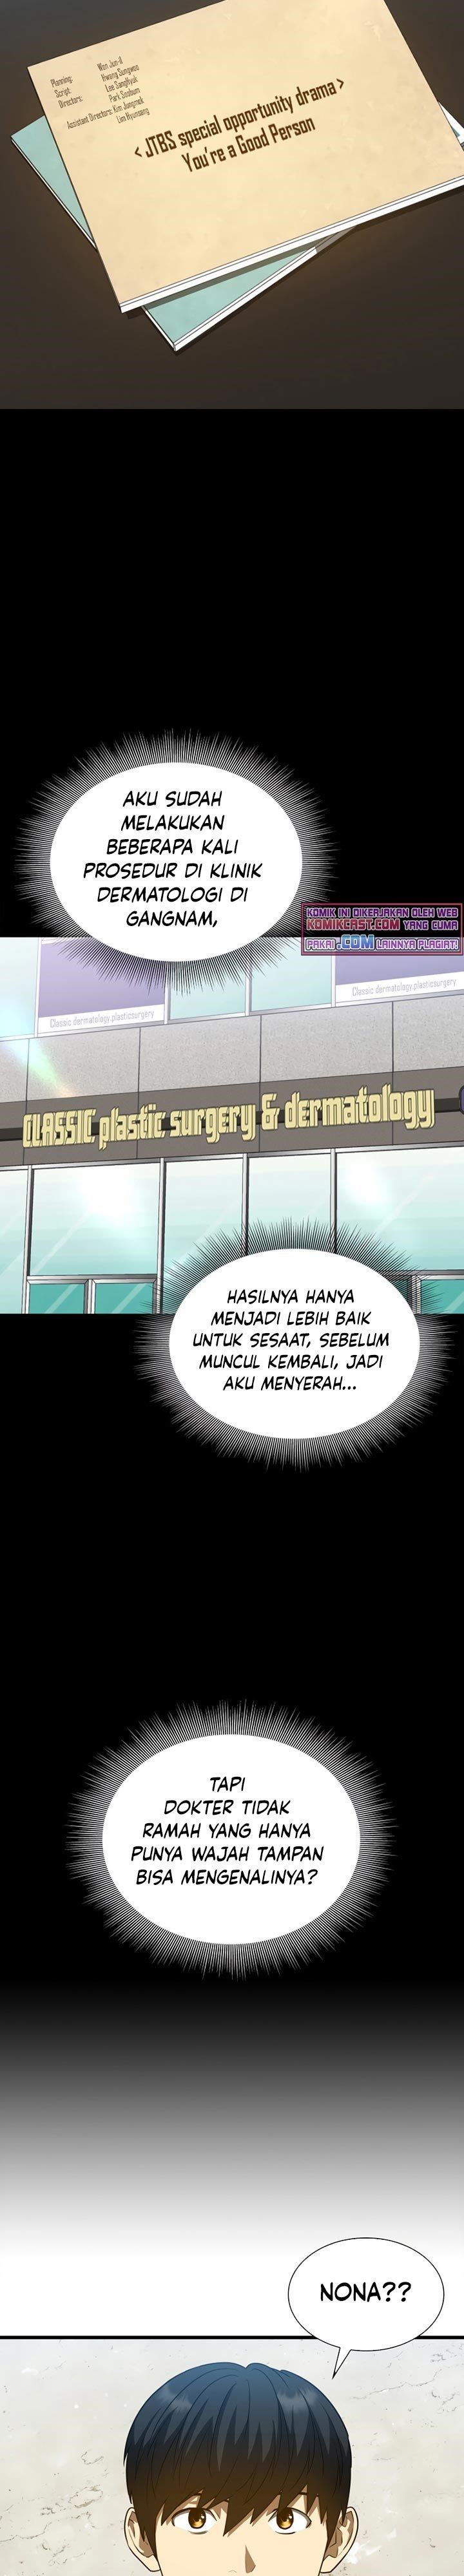 Perfect Surgeon Chapter 8